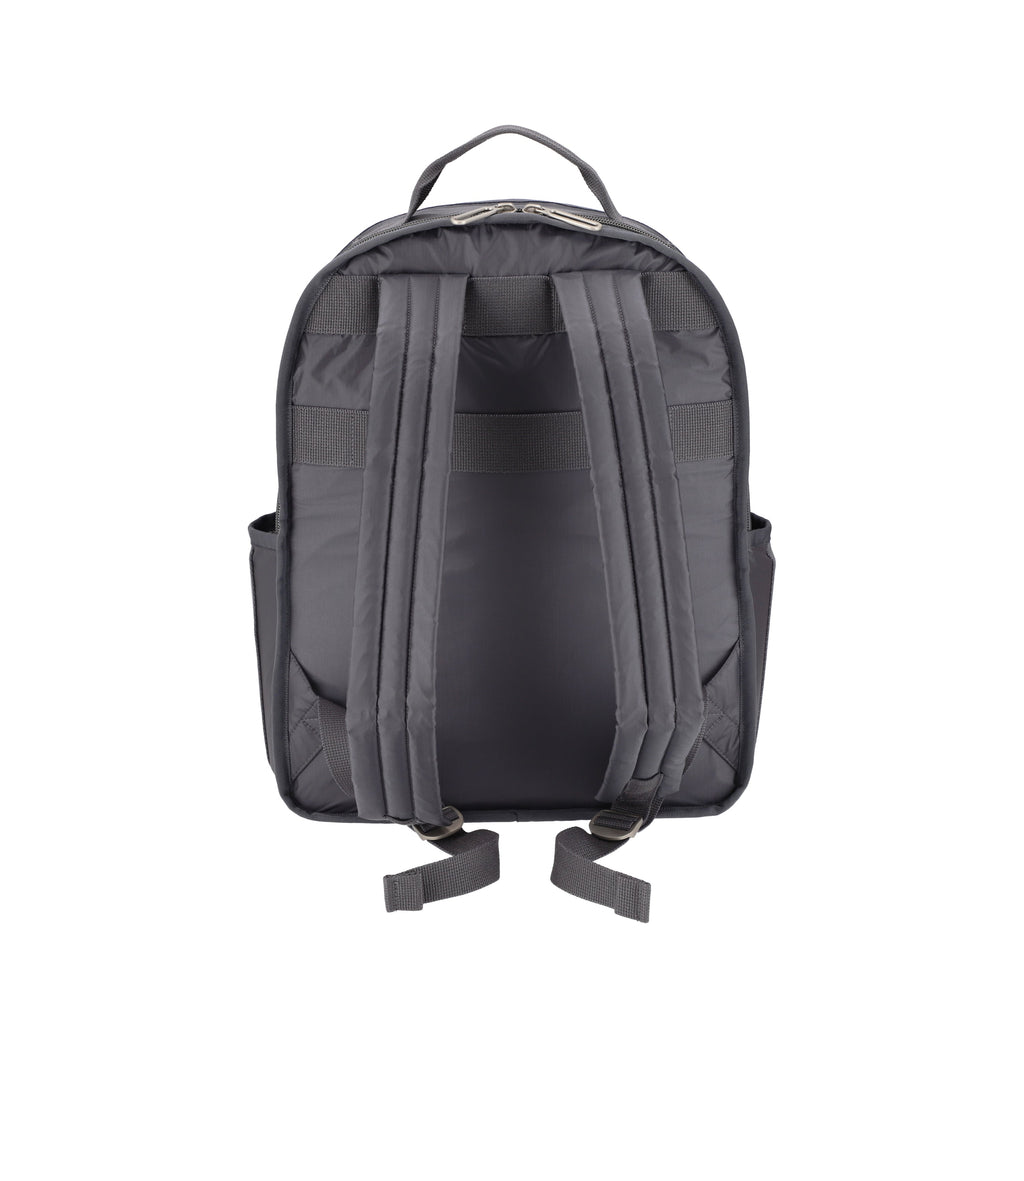 Essential Carryall Backpack - 23976605777968